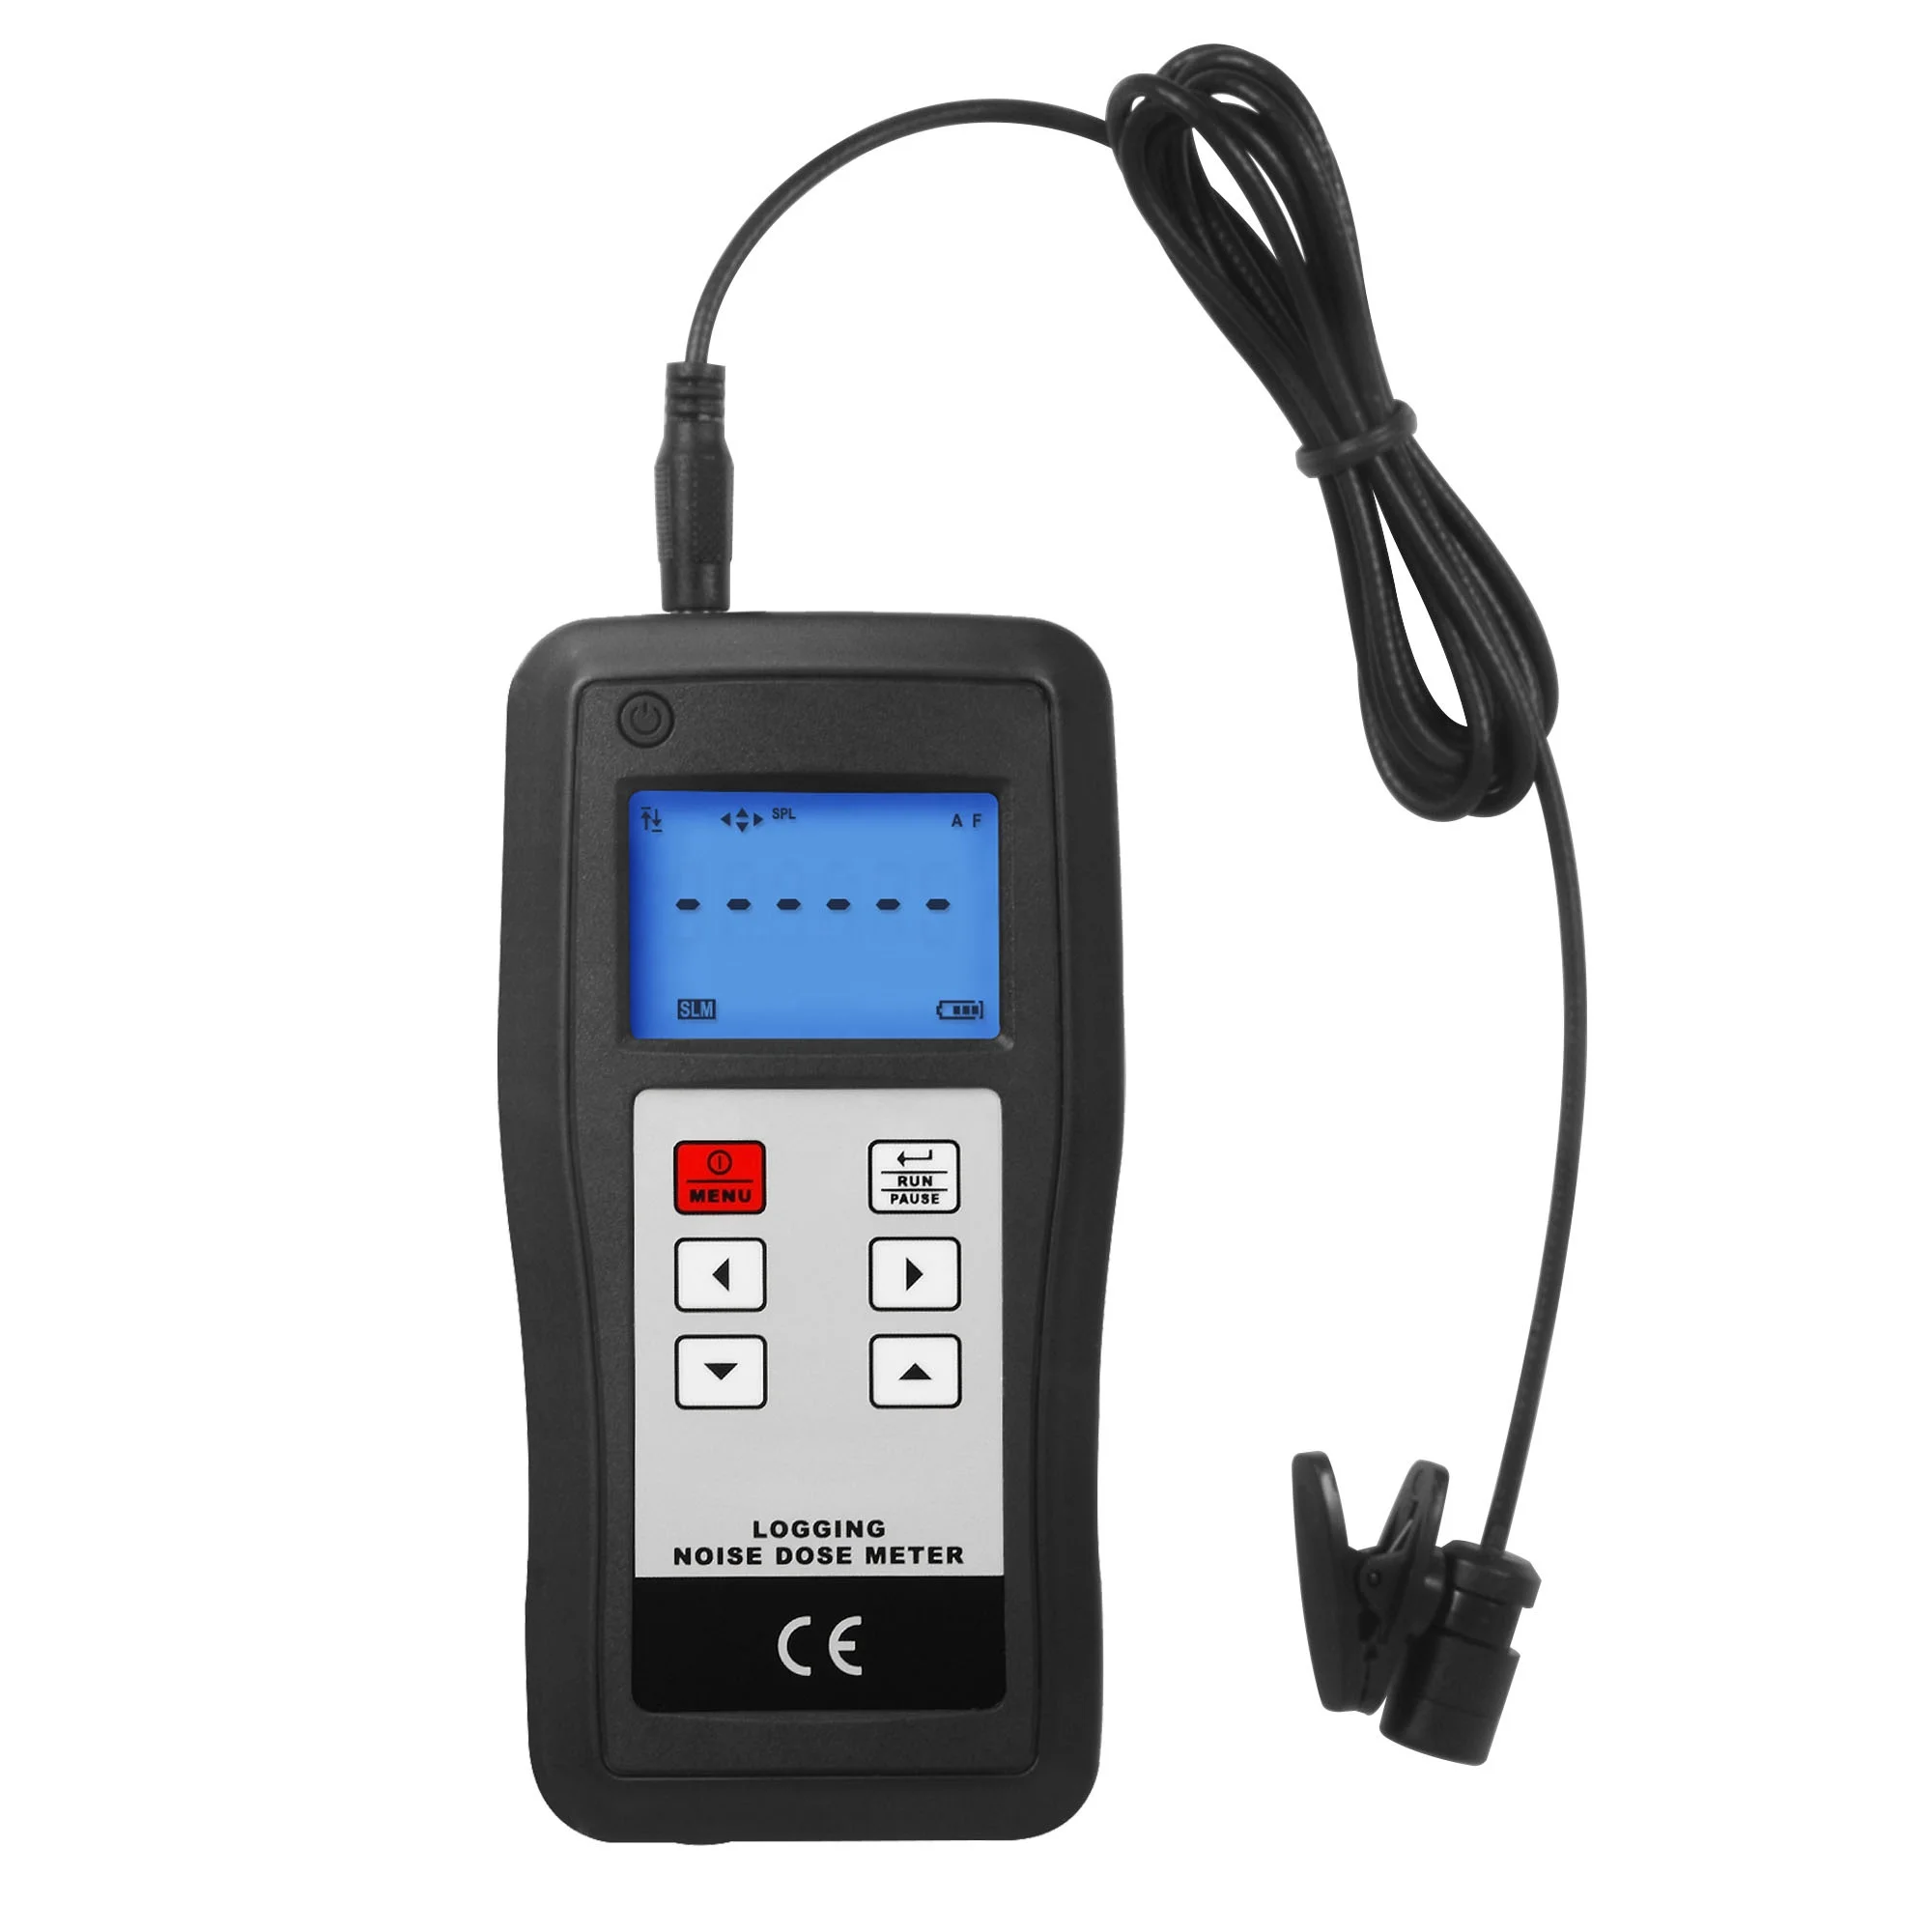 Digital Personal Noise Dose Meter Dosimeter with Direct Read Out Results Function (1600443580034)